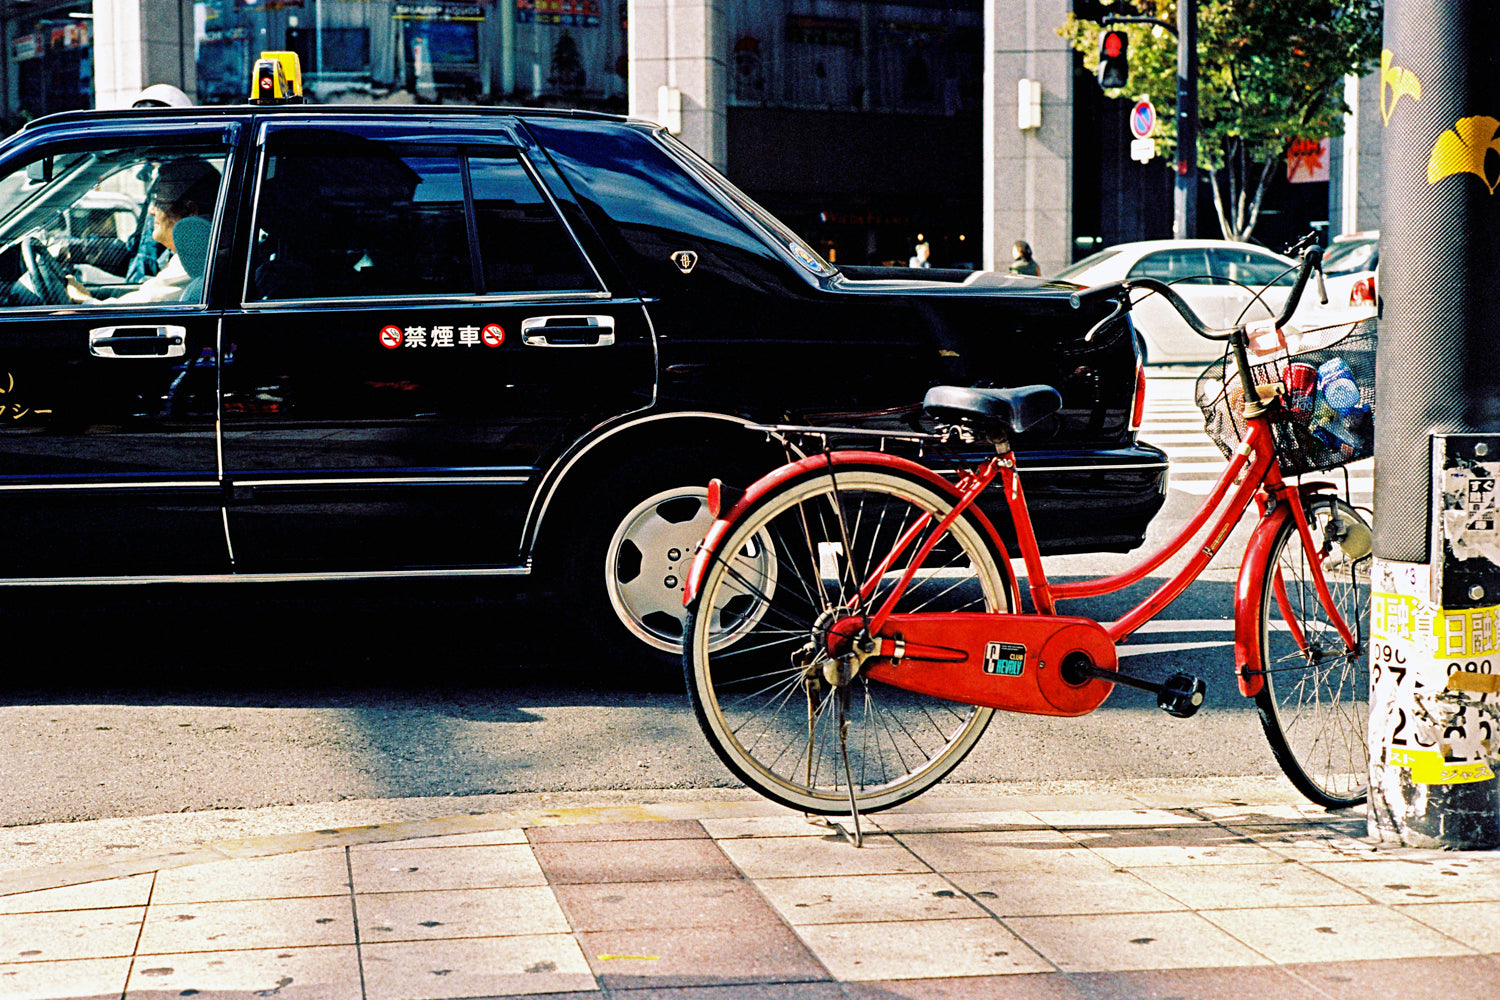 A photograph of a red bike leaning on a pole in a city street in Tokyo. There is a black taxi in the street.  Tokyo Japan. 